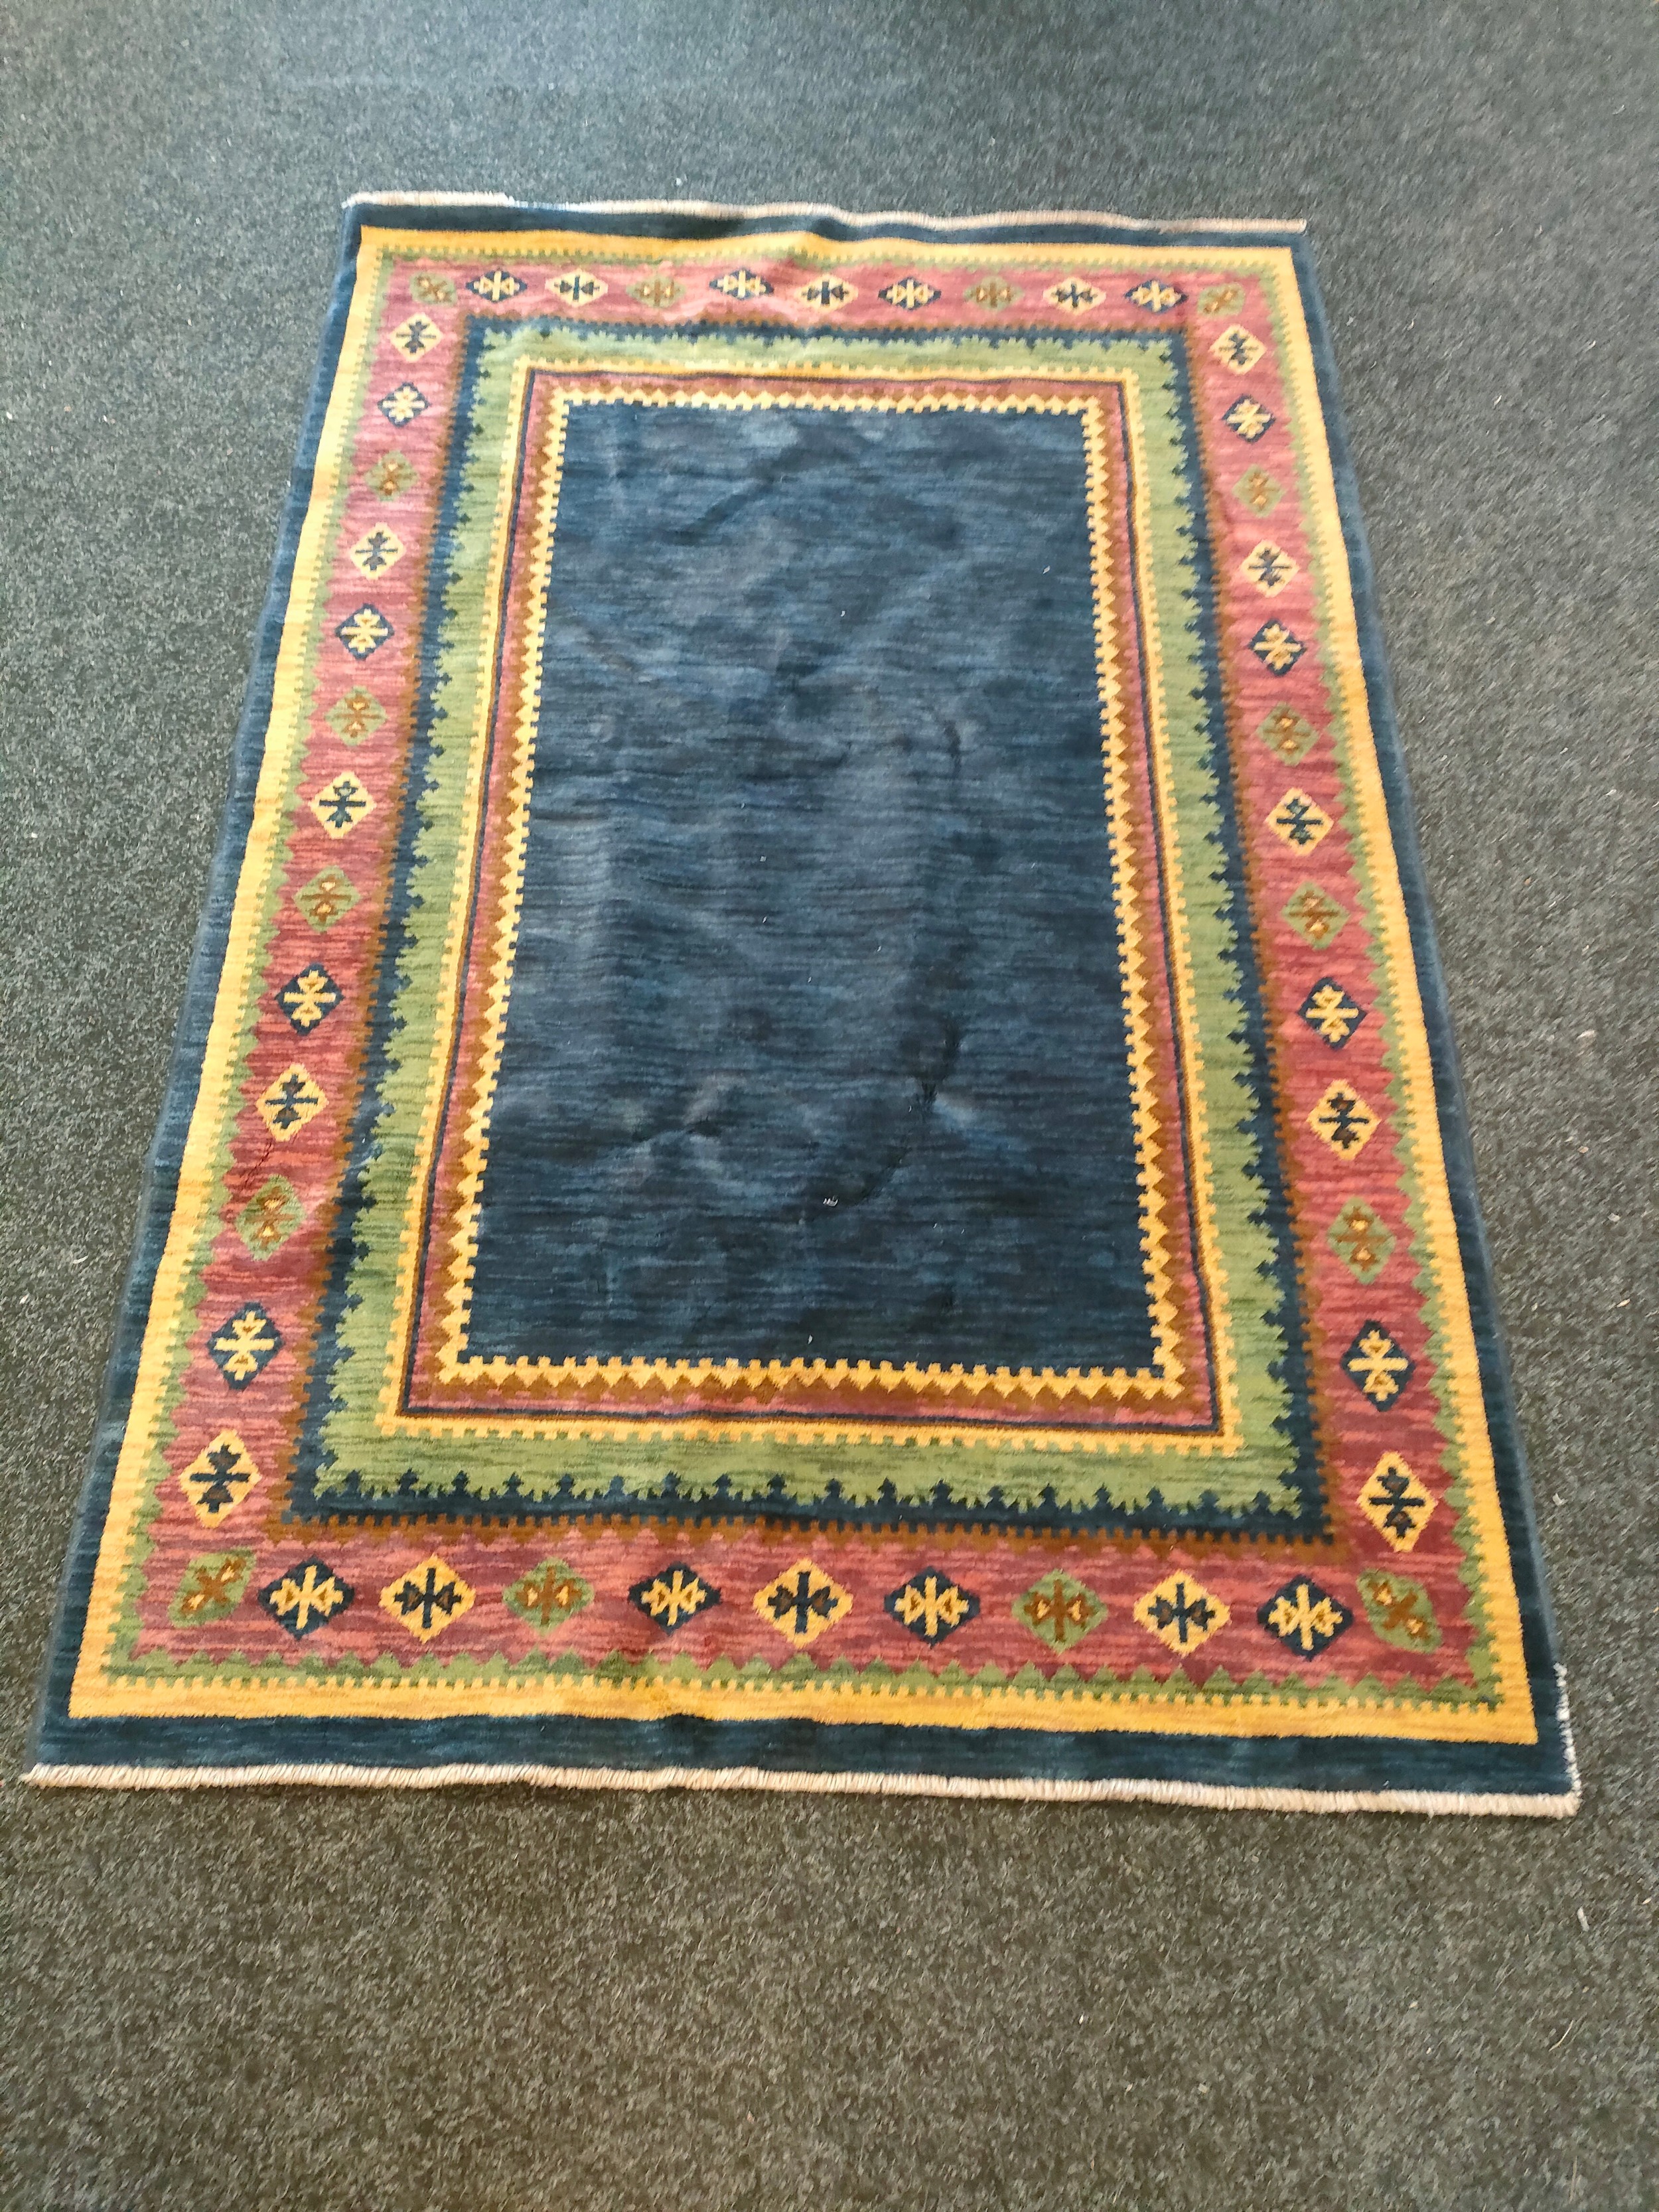 A Hand Knotted Gabbeh Turkish Rug set with a blue centre & Turkish border pattern [233.5x135cm]